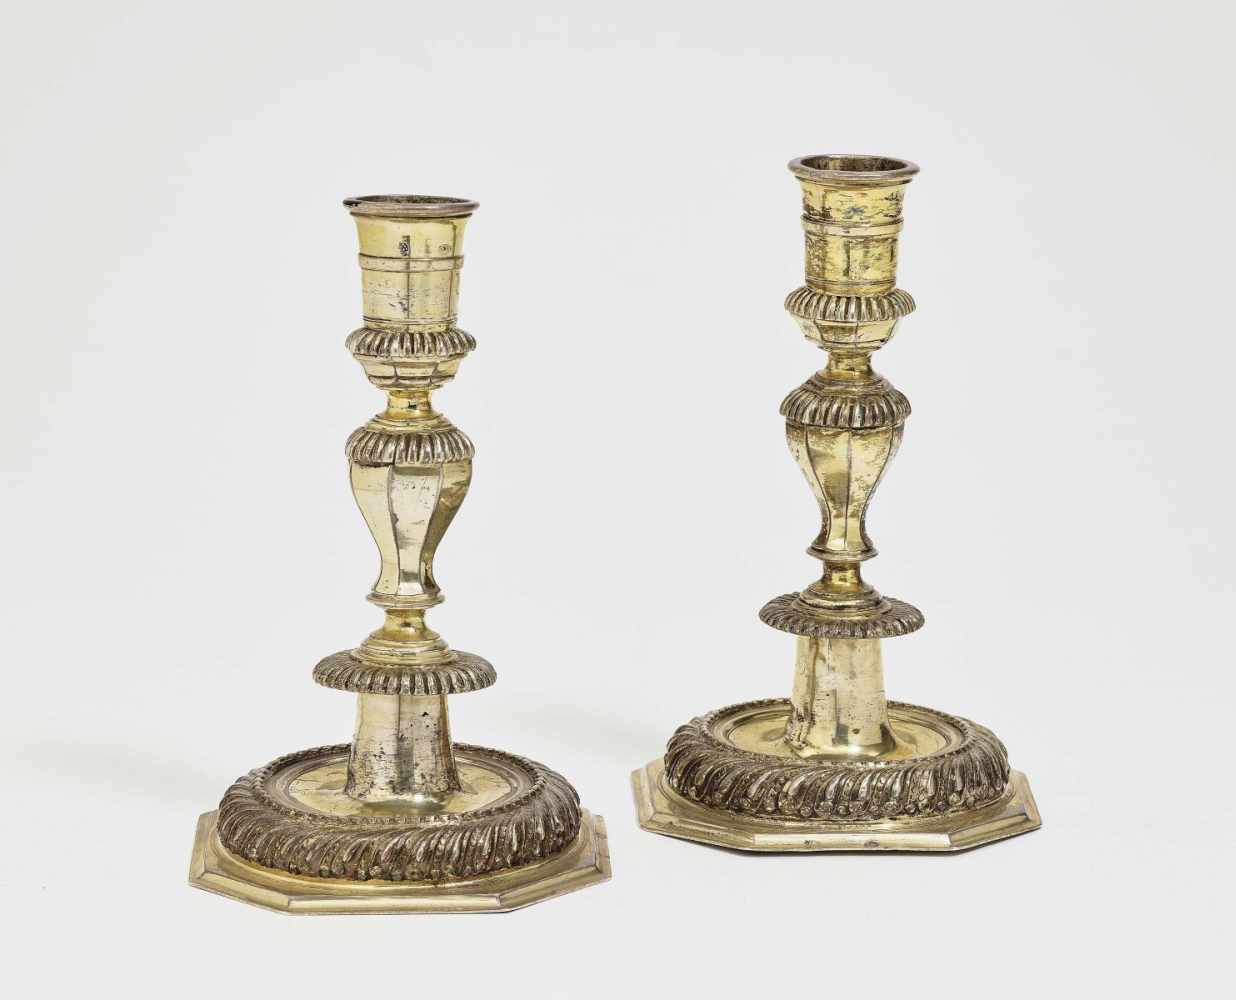 A Pair of CandlesticksAugsburg, 1701 - 1705, Georg III Lotter Silver, gold-plated. Faceted